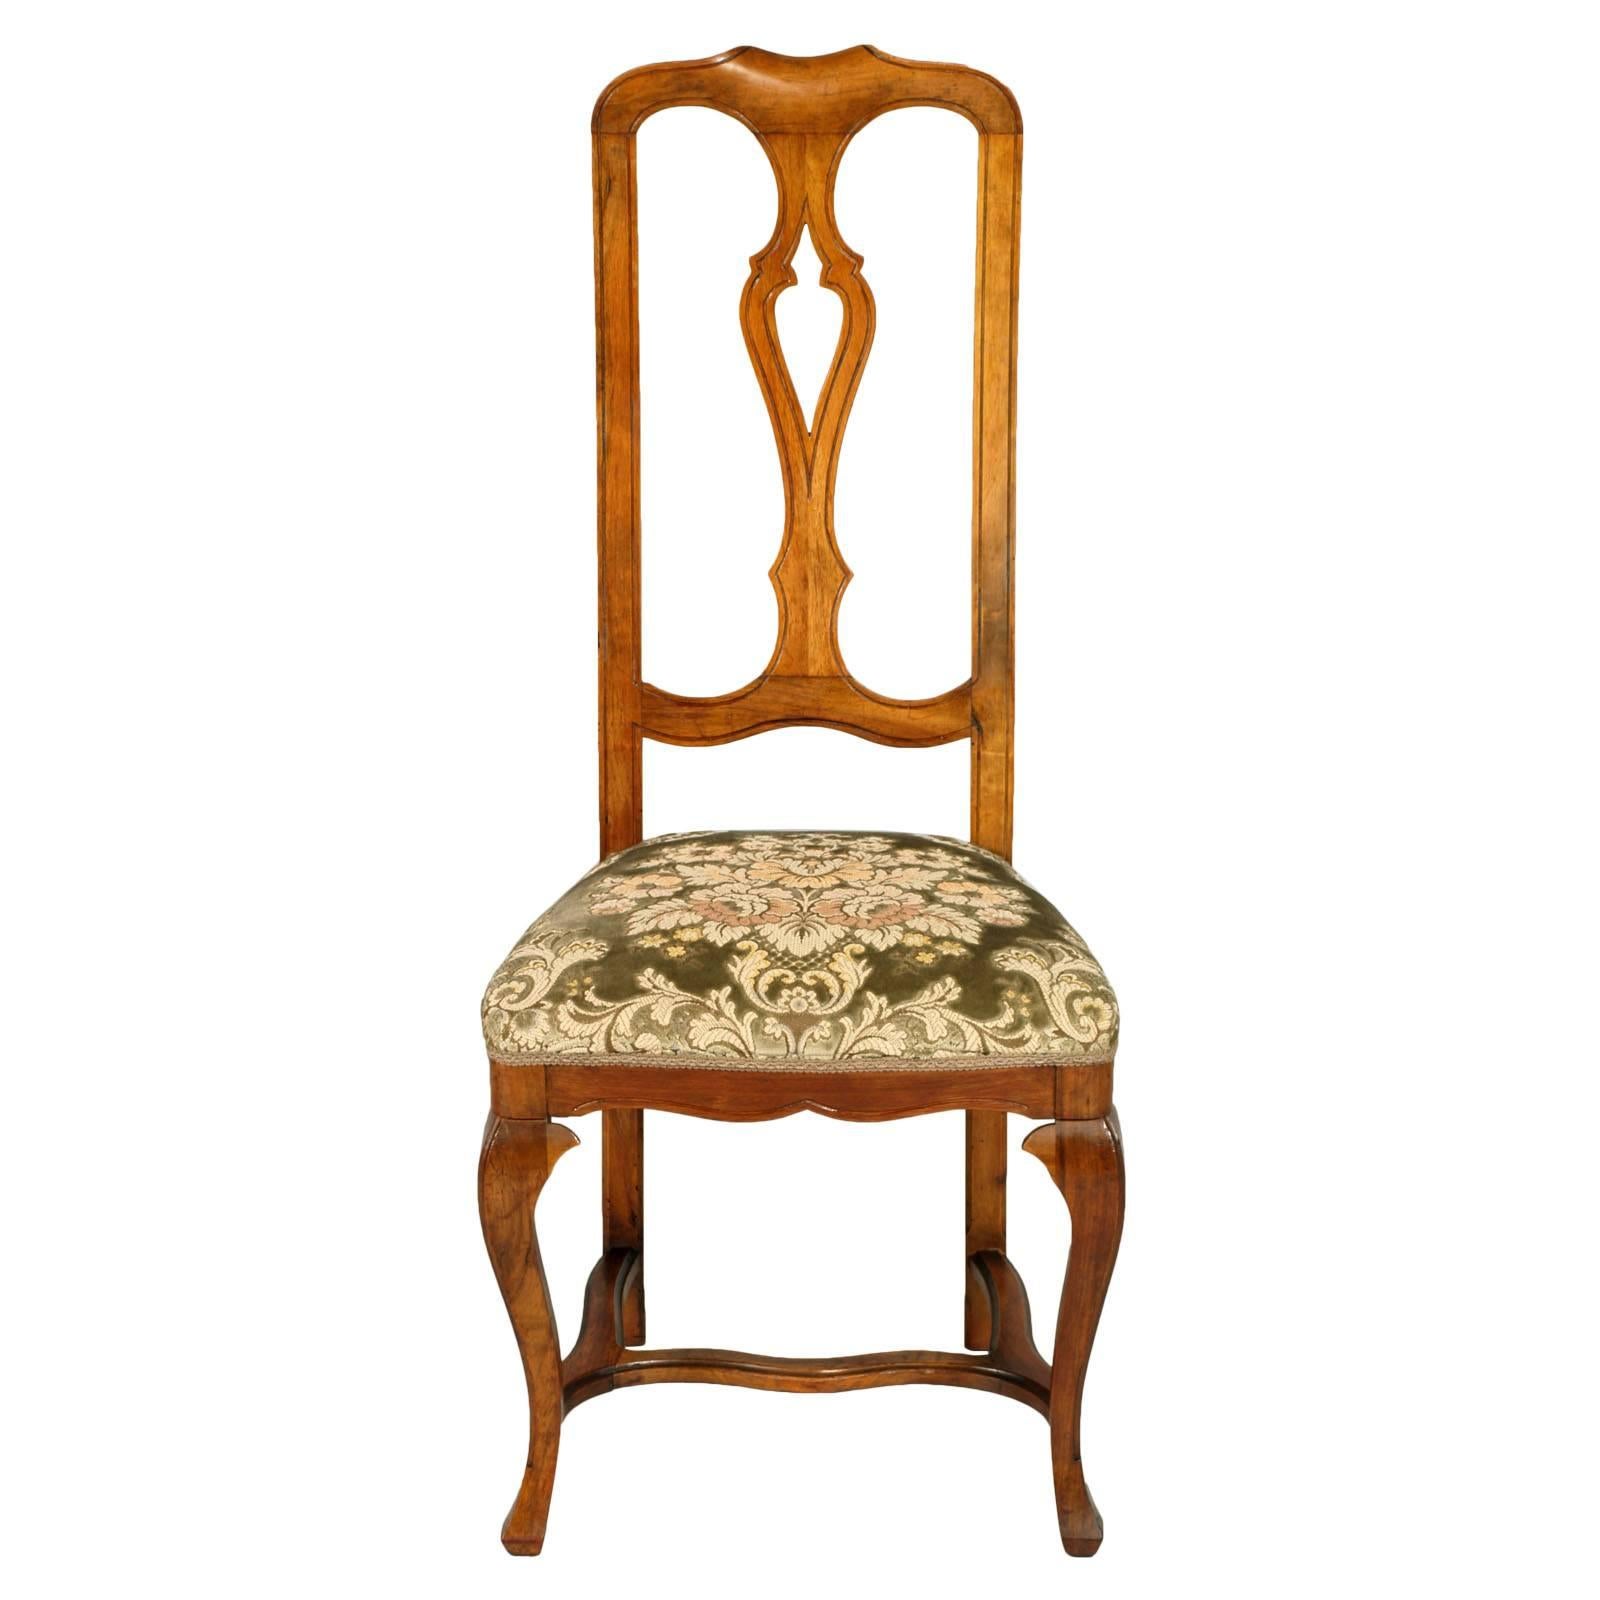 Baroque Revival 19th Century Antique Venetian Baroque Set of Eight Chairs in Blond Walnut